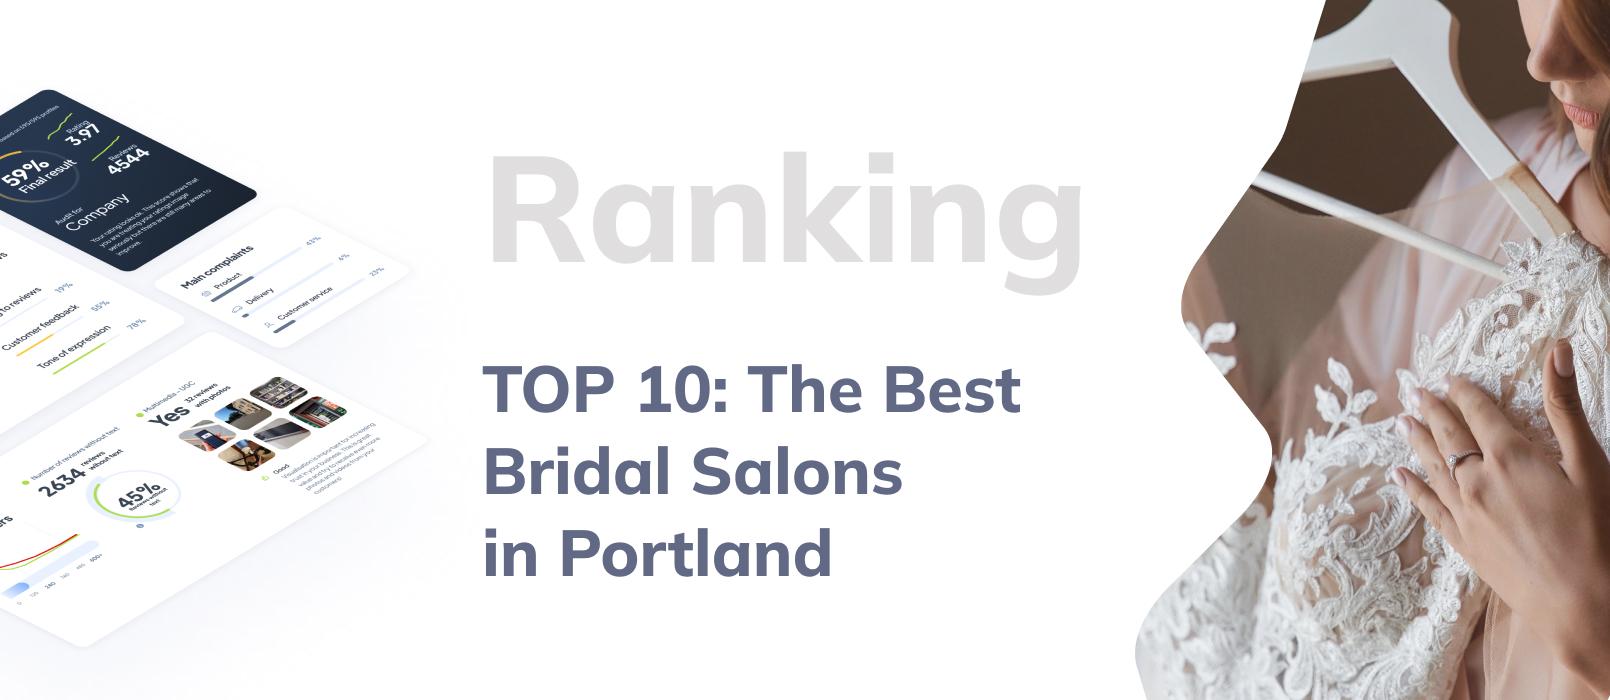 TOP 10: The Best Bridal Shops in Portland